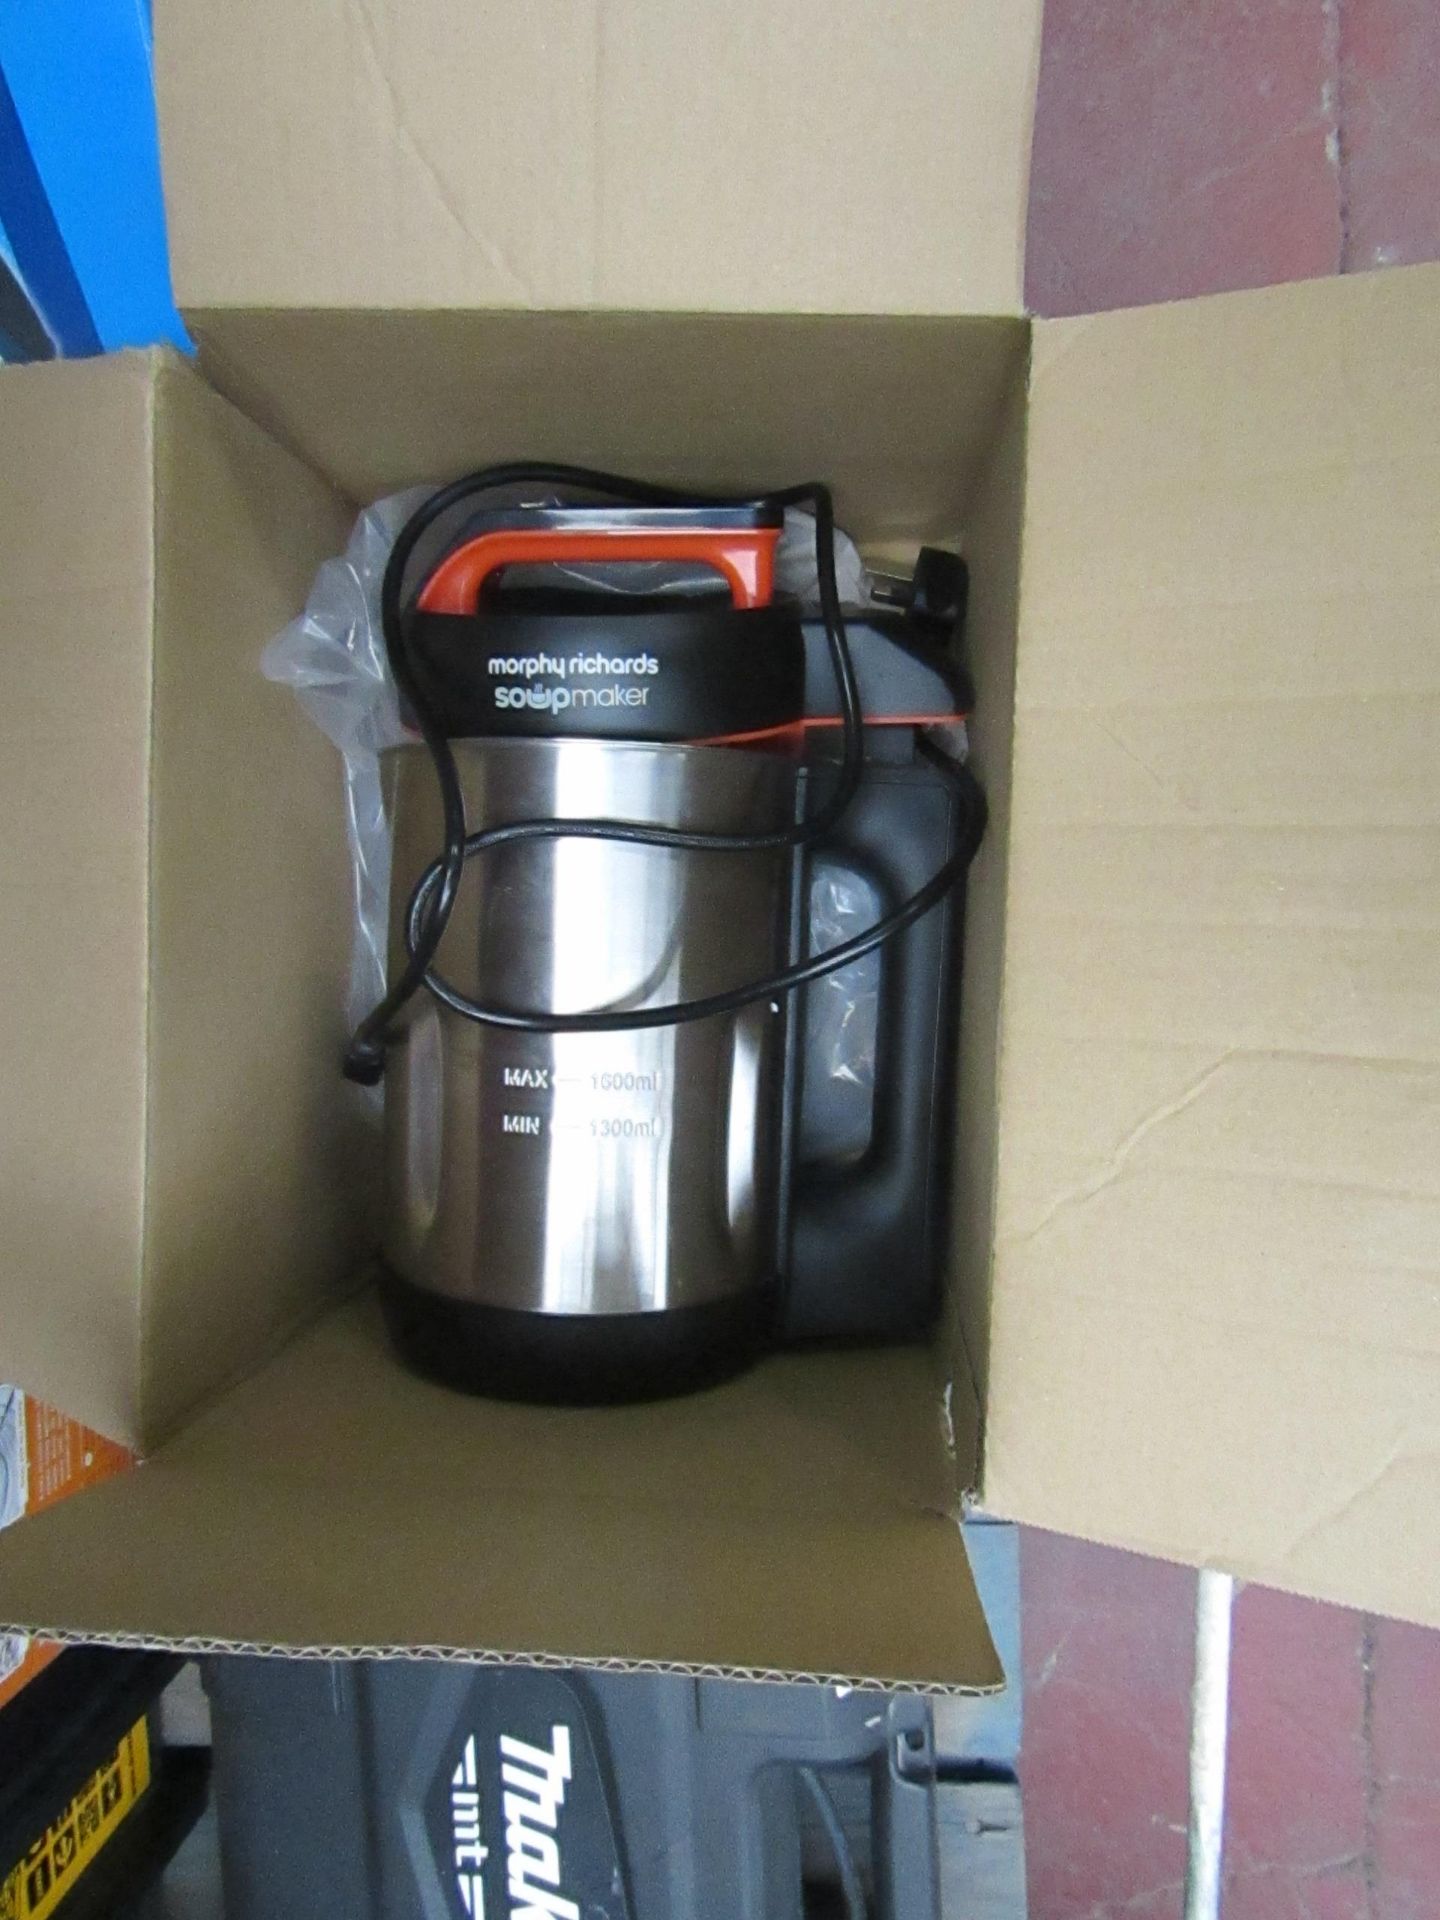 Morphy Richards soup maker, powers on and boxed